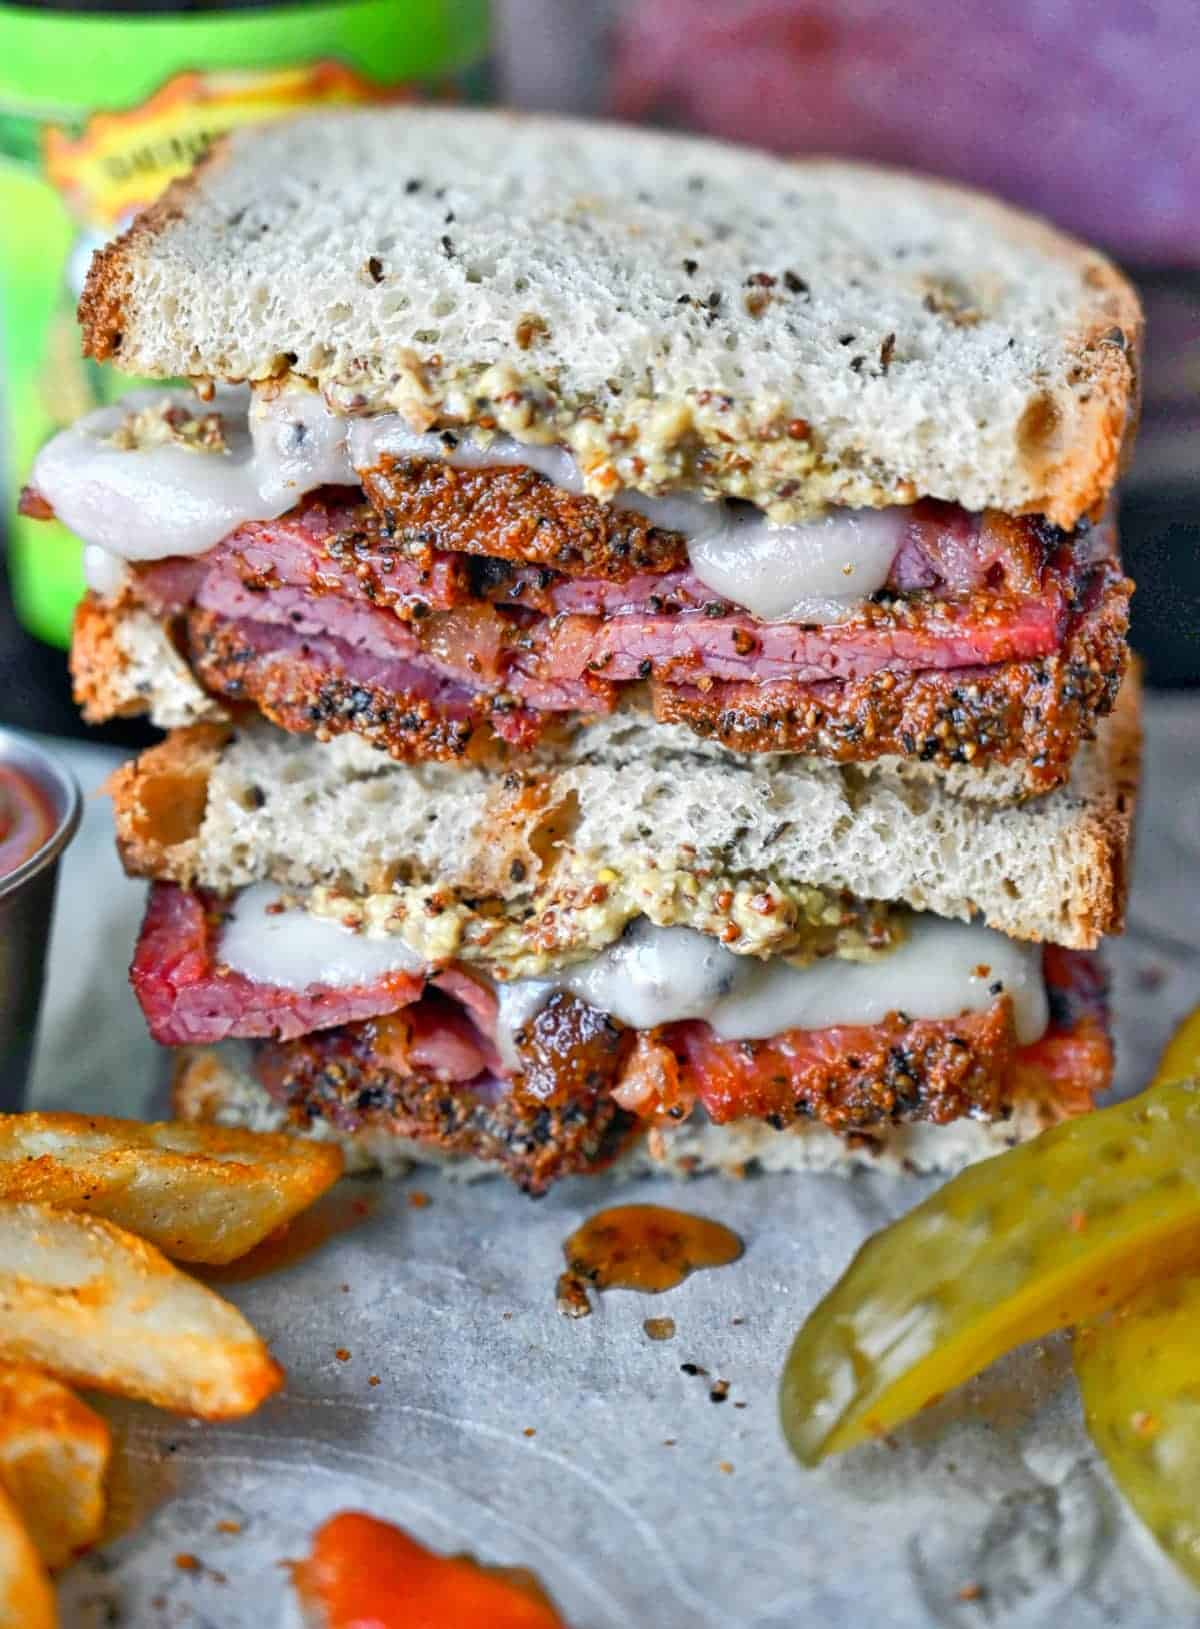 Slow cooker pastrami sandwich with seasoned fries and pickles.